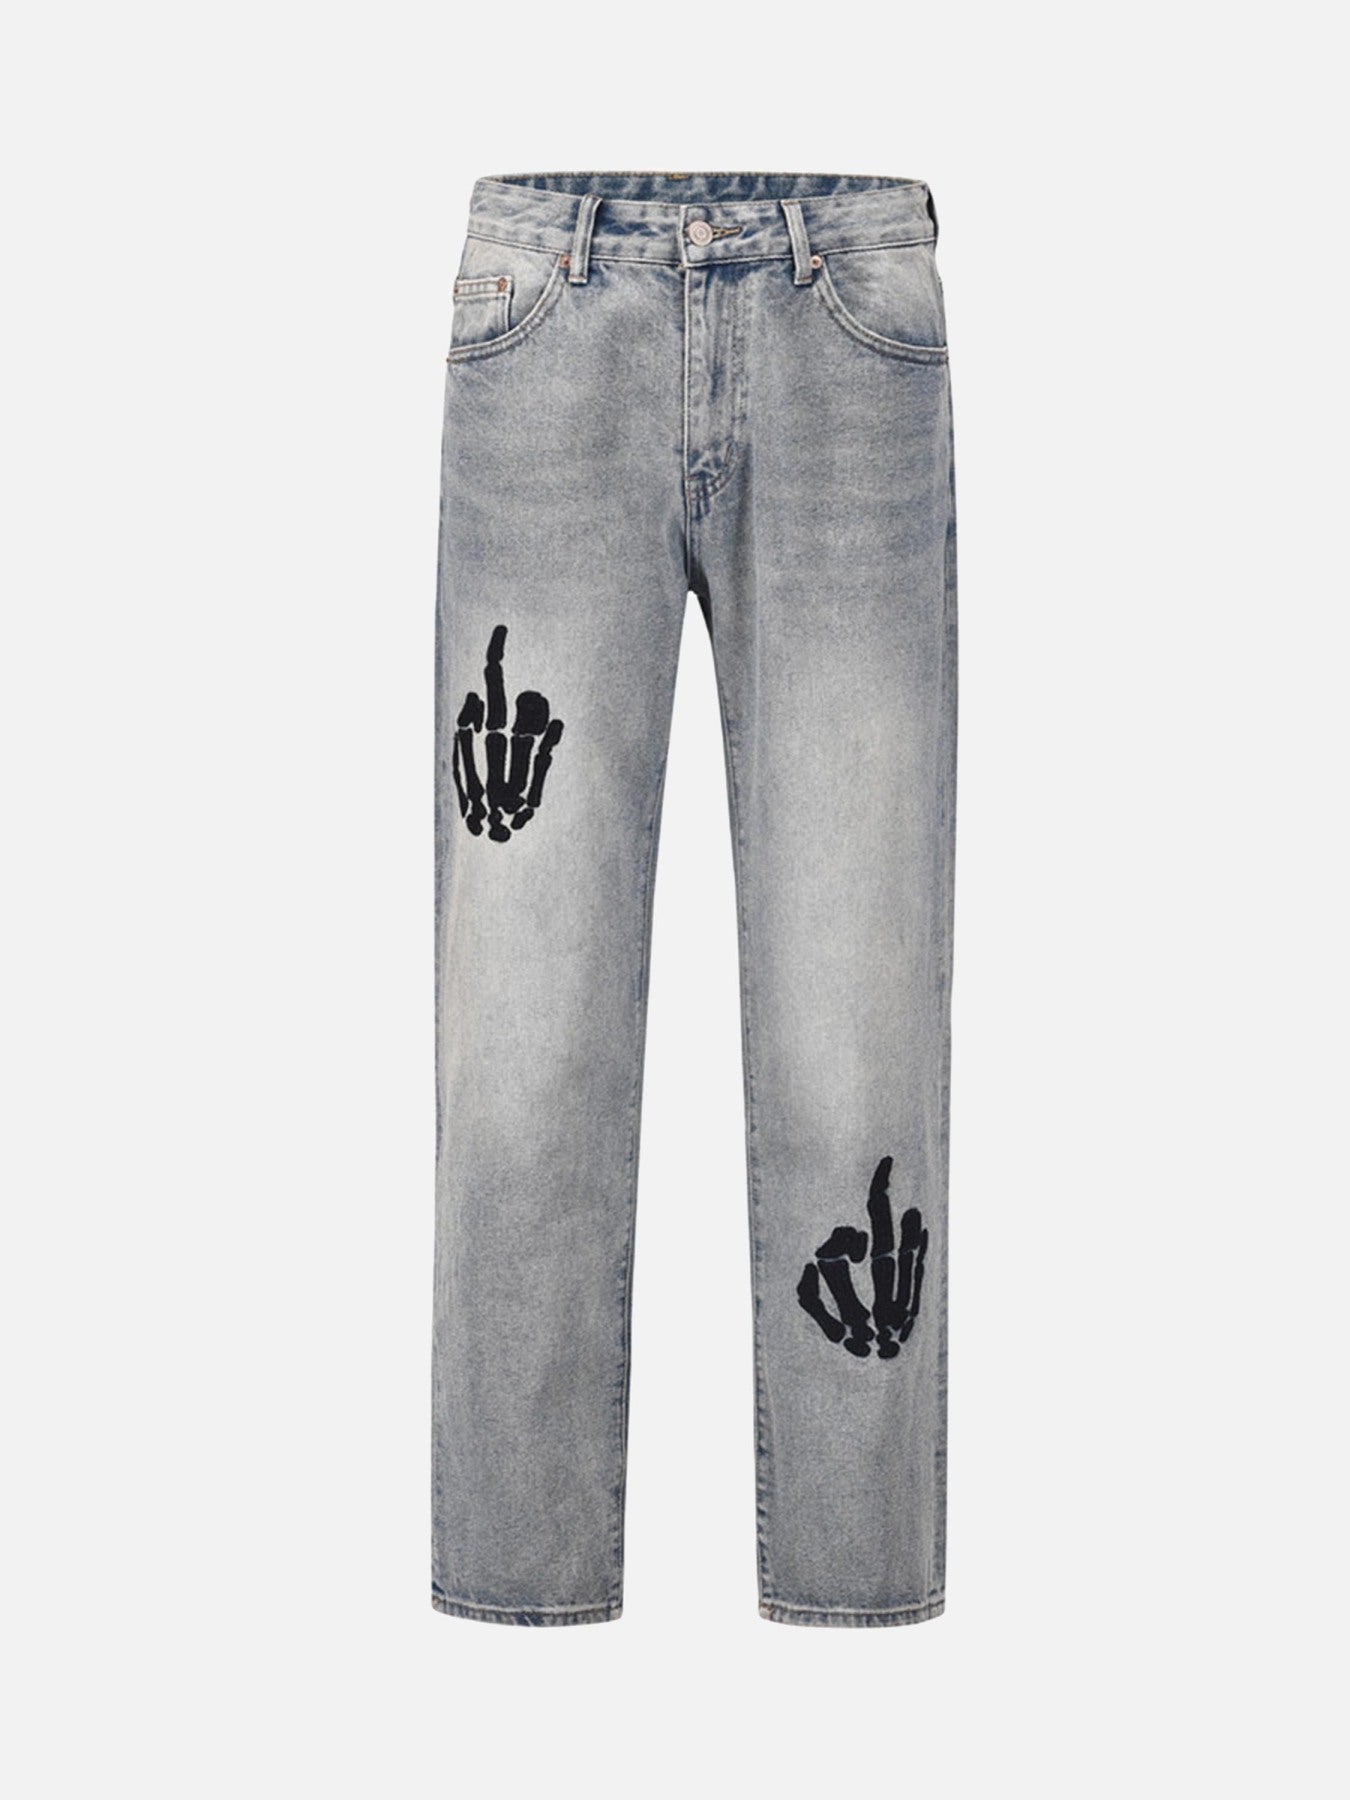 The Supermade Skull Gesture Embroidered Jeans